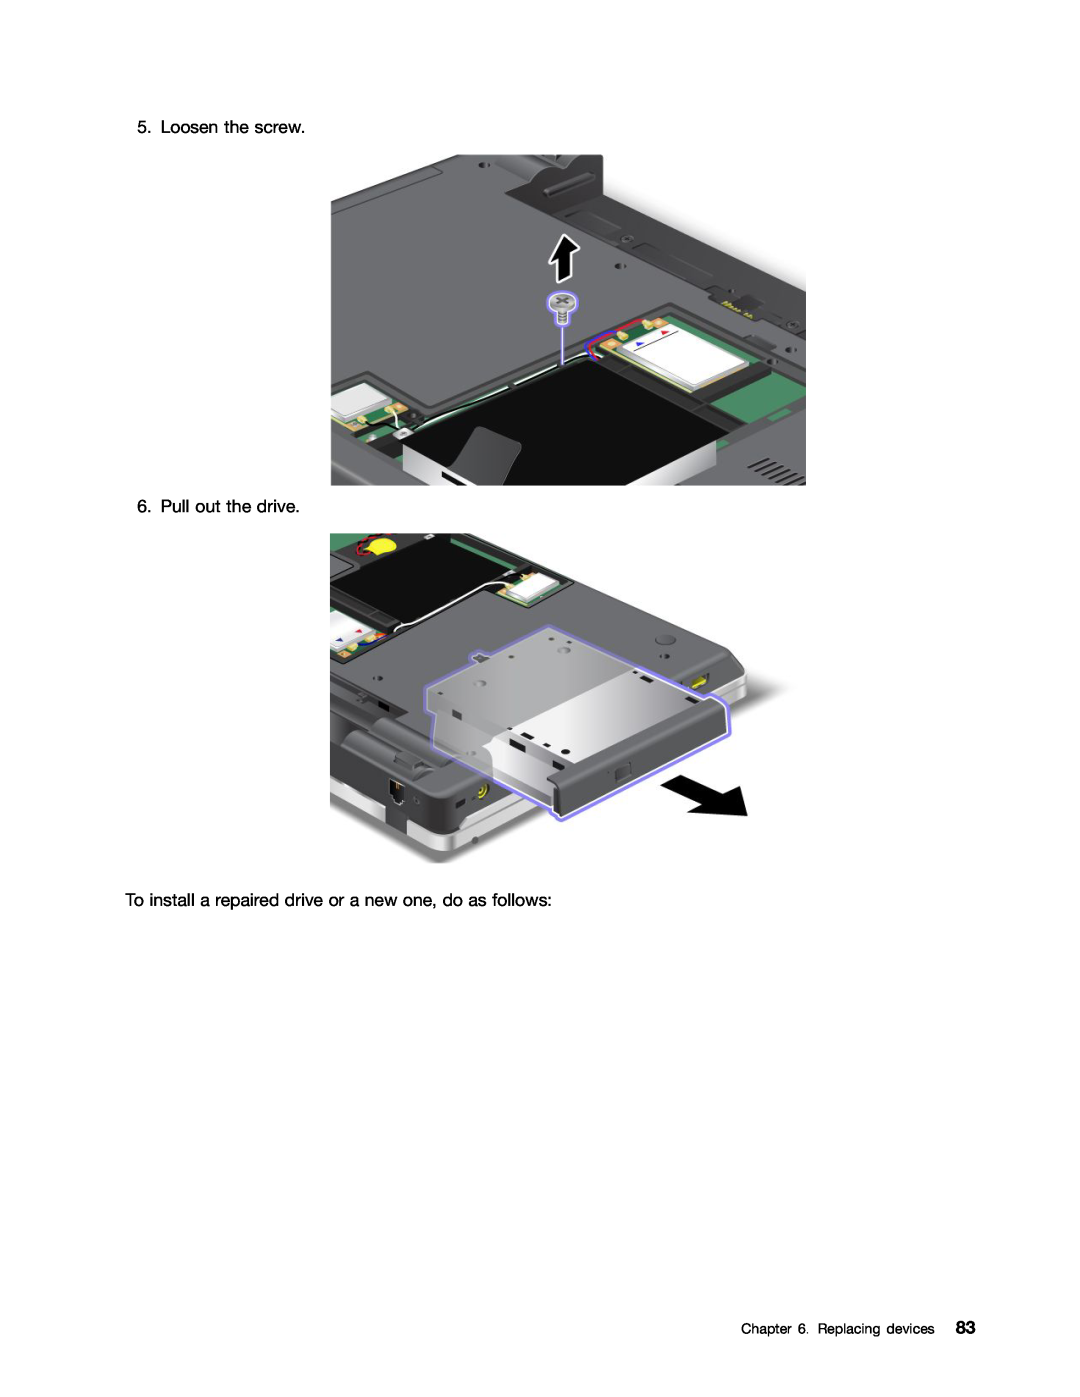 Lenovo 114155U, E520, E420 Loosen the screw 6. Pull out the drive, To install a repaired drive or a new one, do as follows 